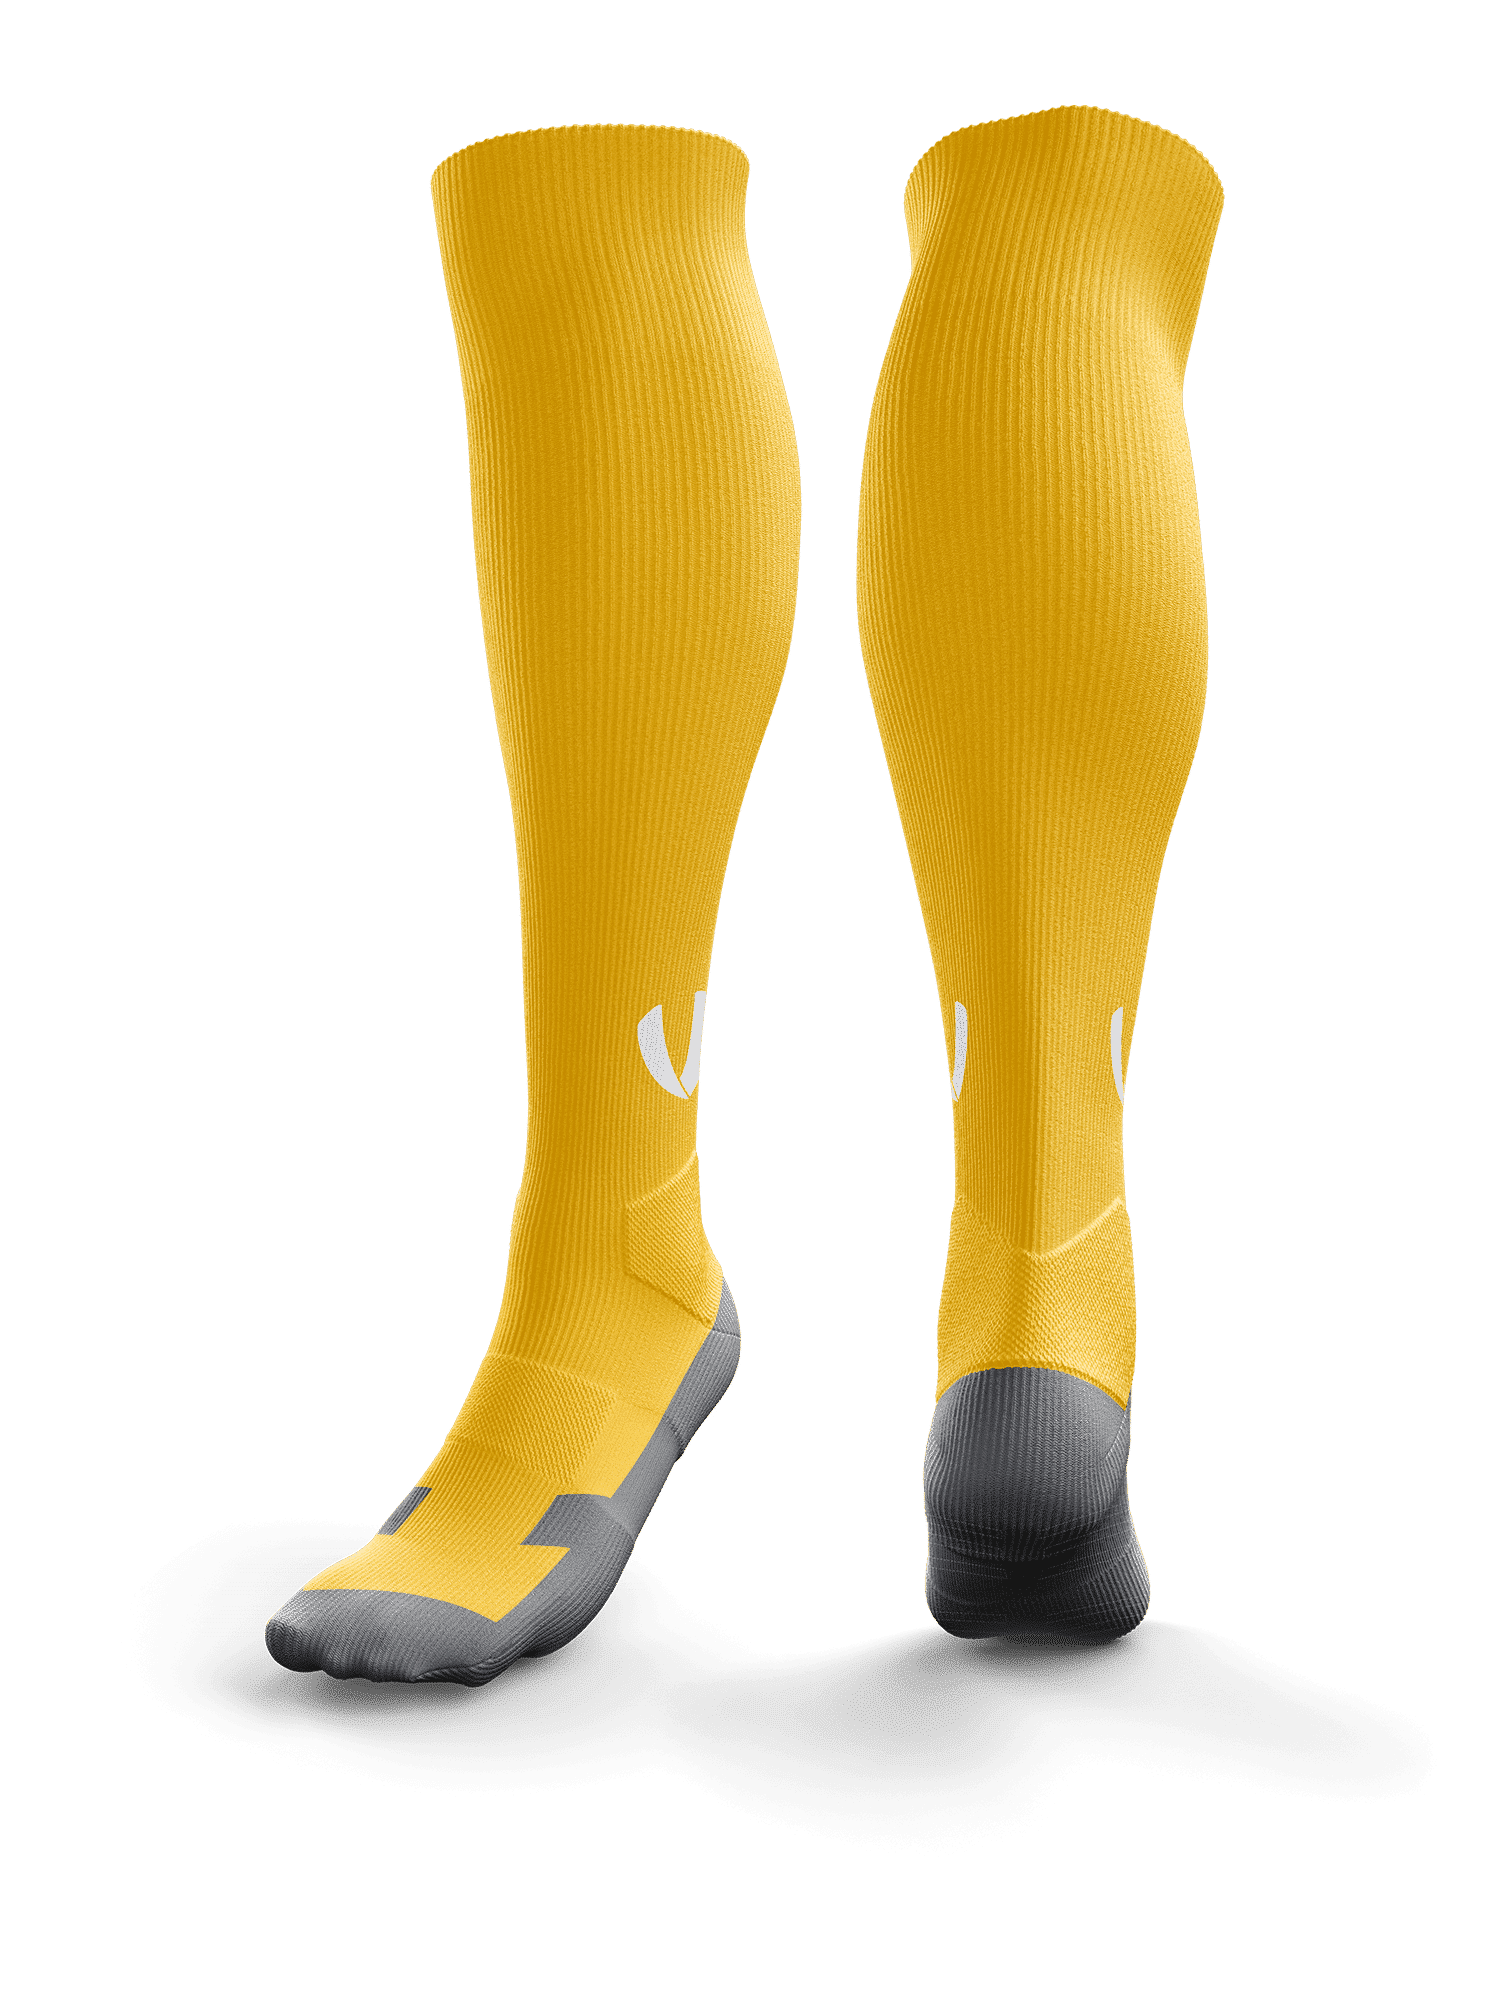 https://www.vetosports.com/wp-content/uploads/2020/11/Performance-Sock-2.0-Yellow-Combined.png